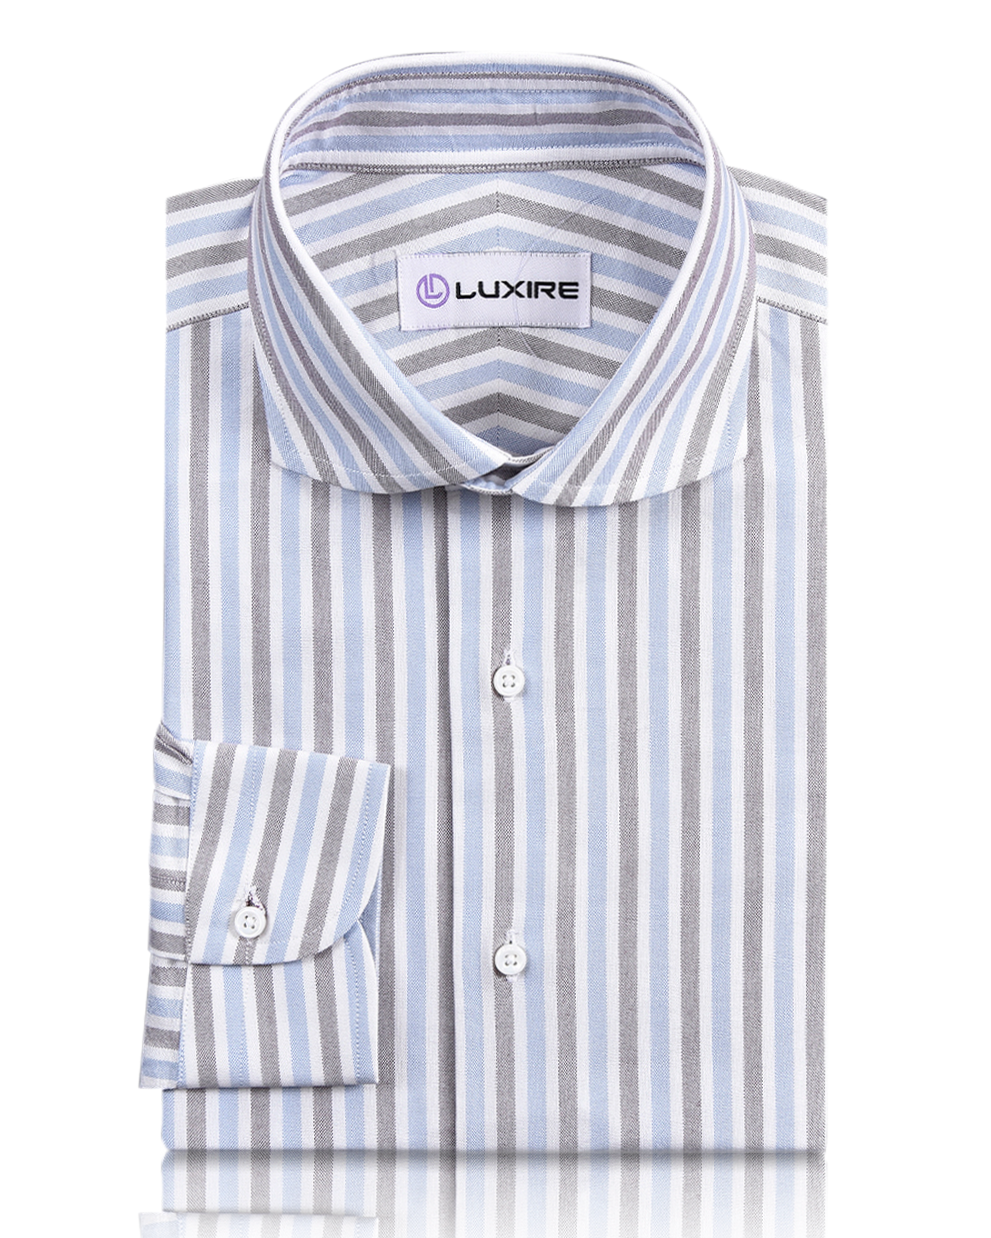 Front of the custom oxford shirt for men by Luxire in white with maroon and blue stripes